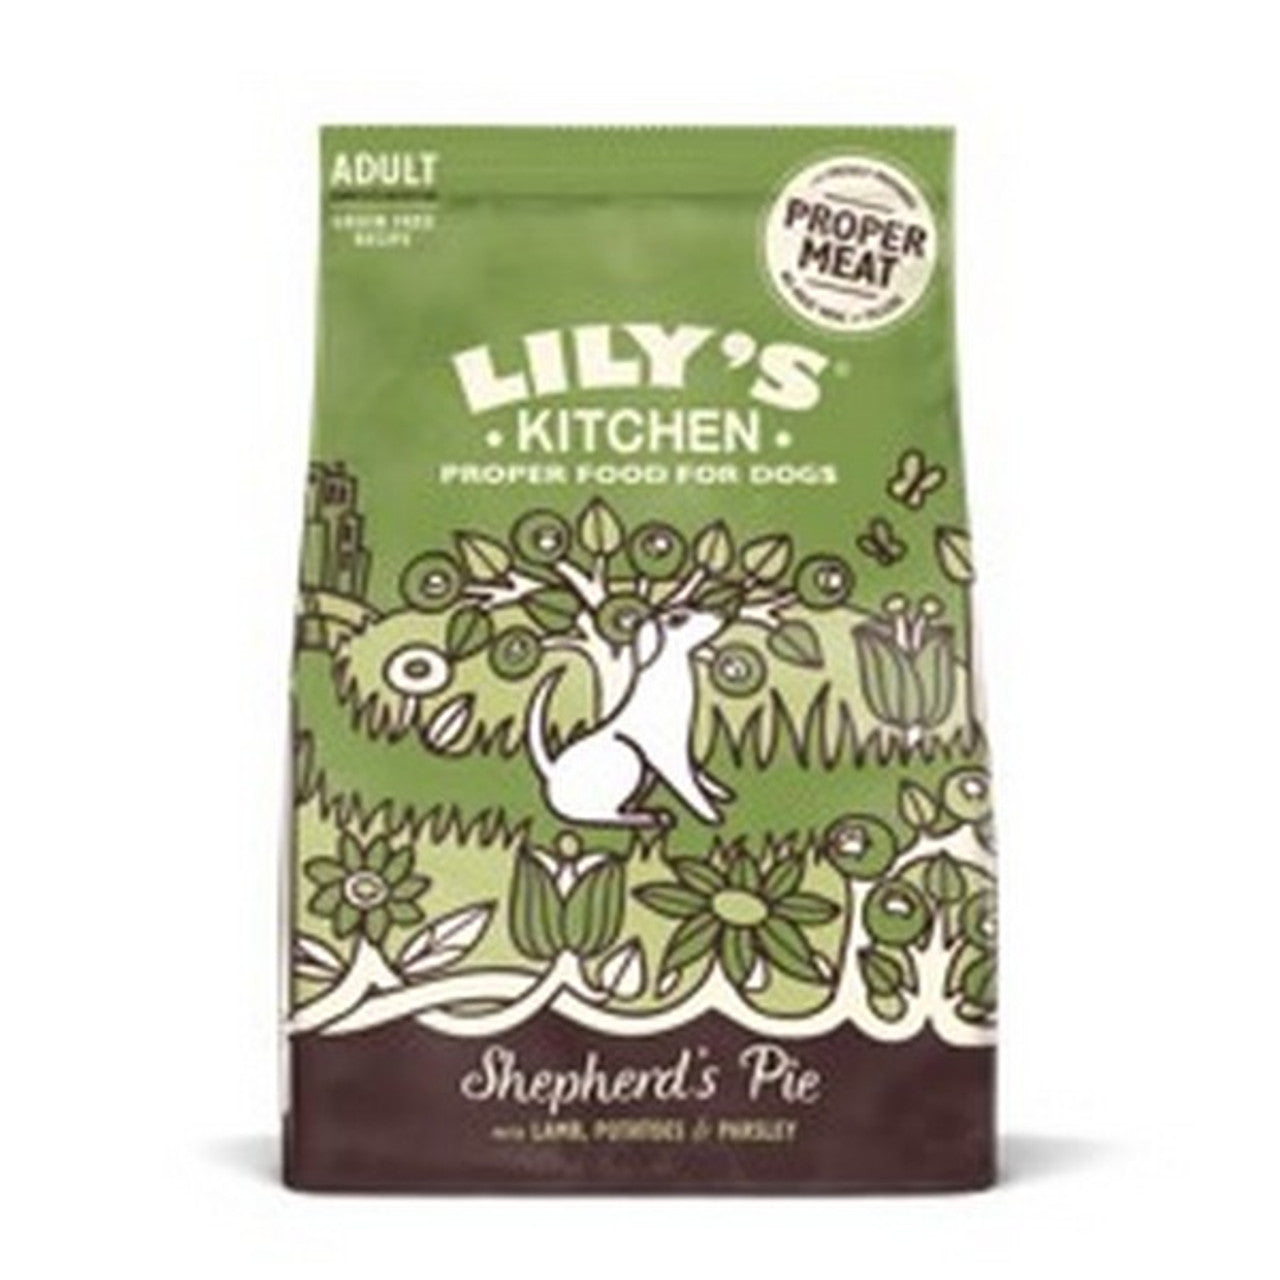 Lilys Kitchen Shepherds Pie with Lamb Potatoes and Parsley Dry Dog Food 2.5kg